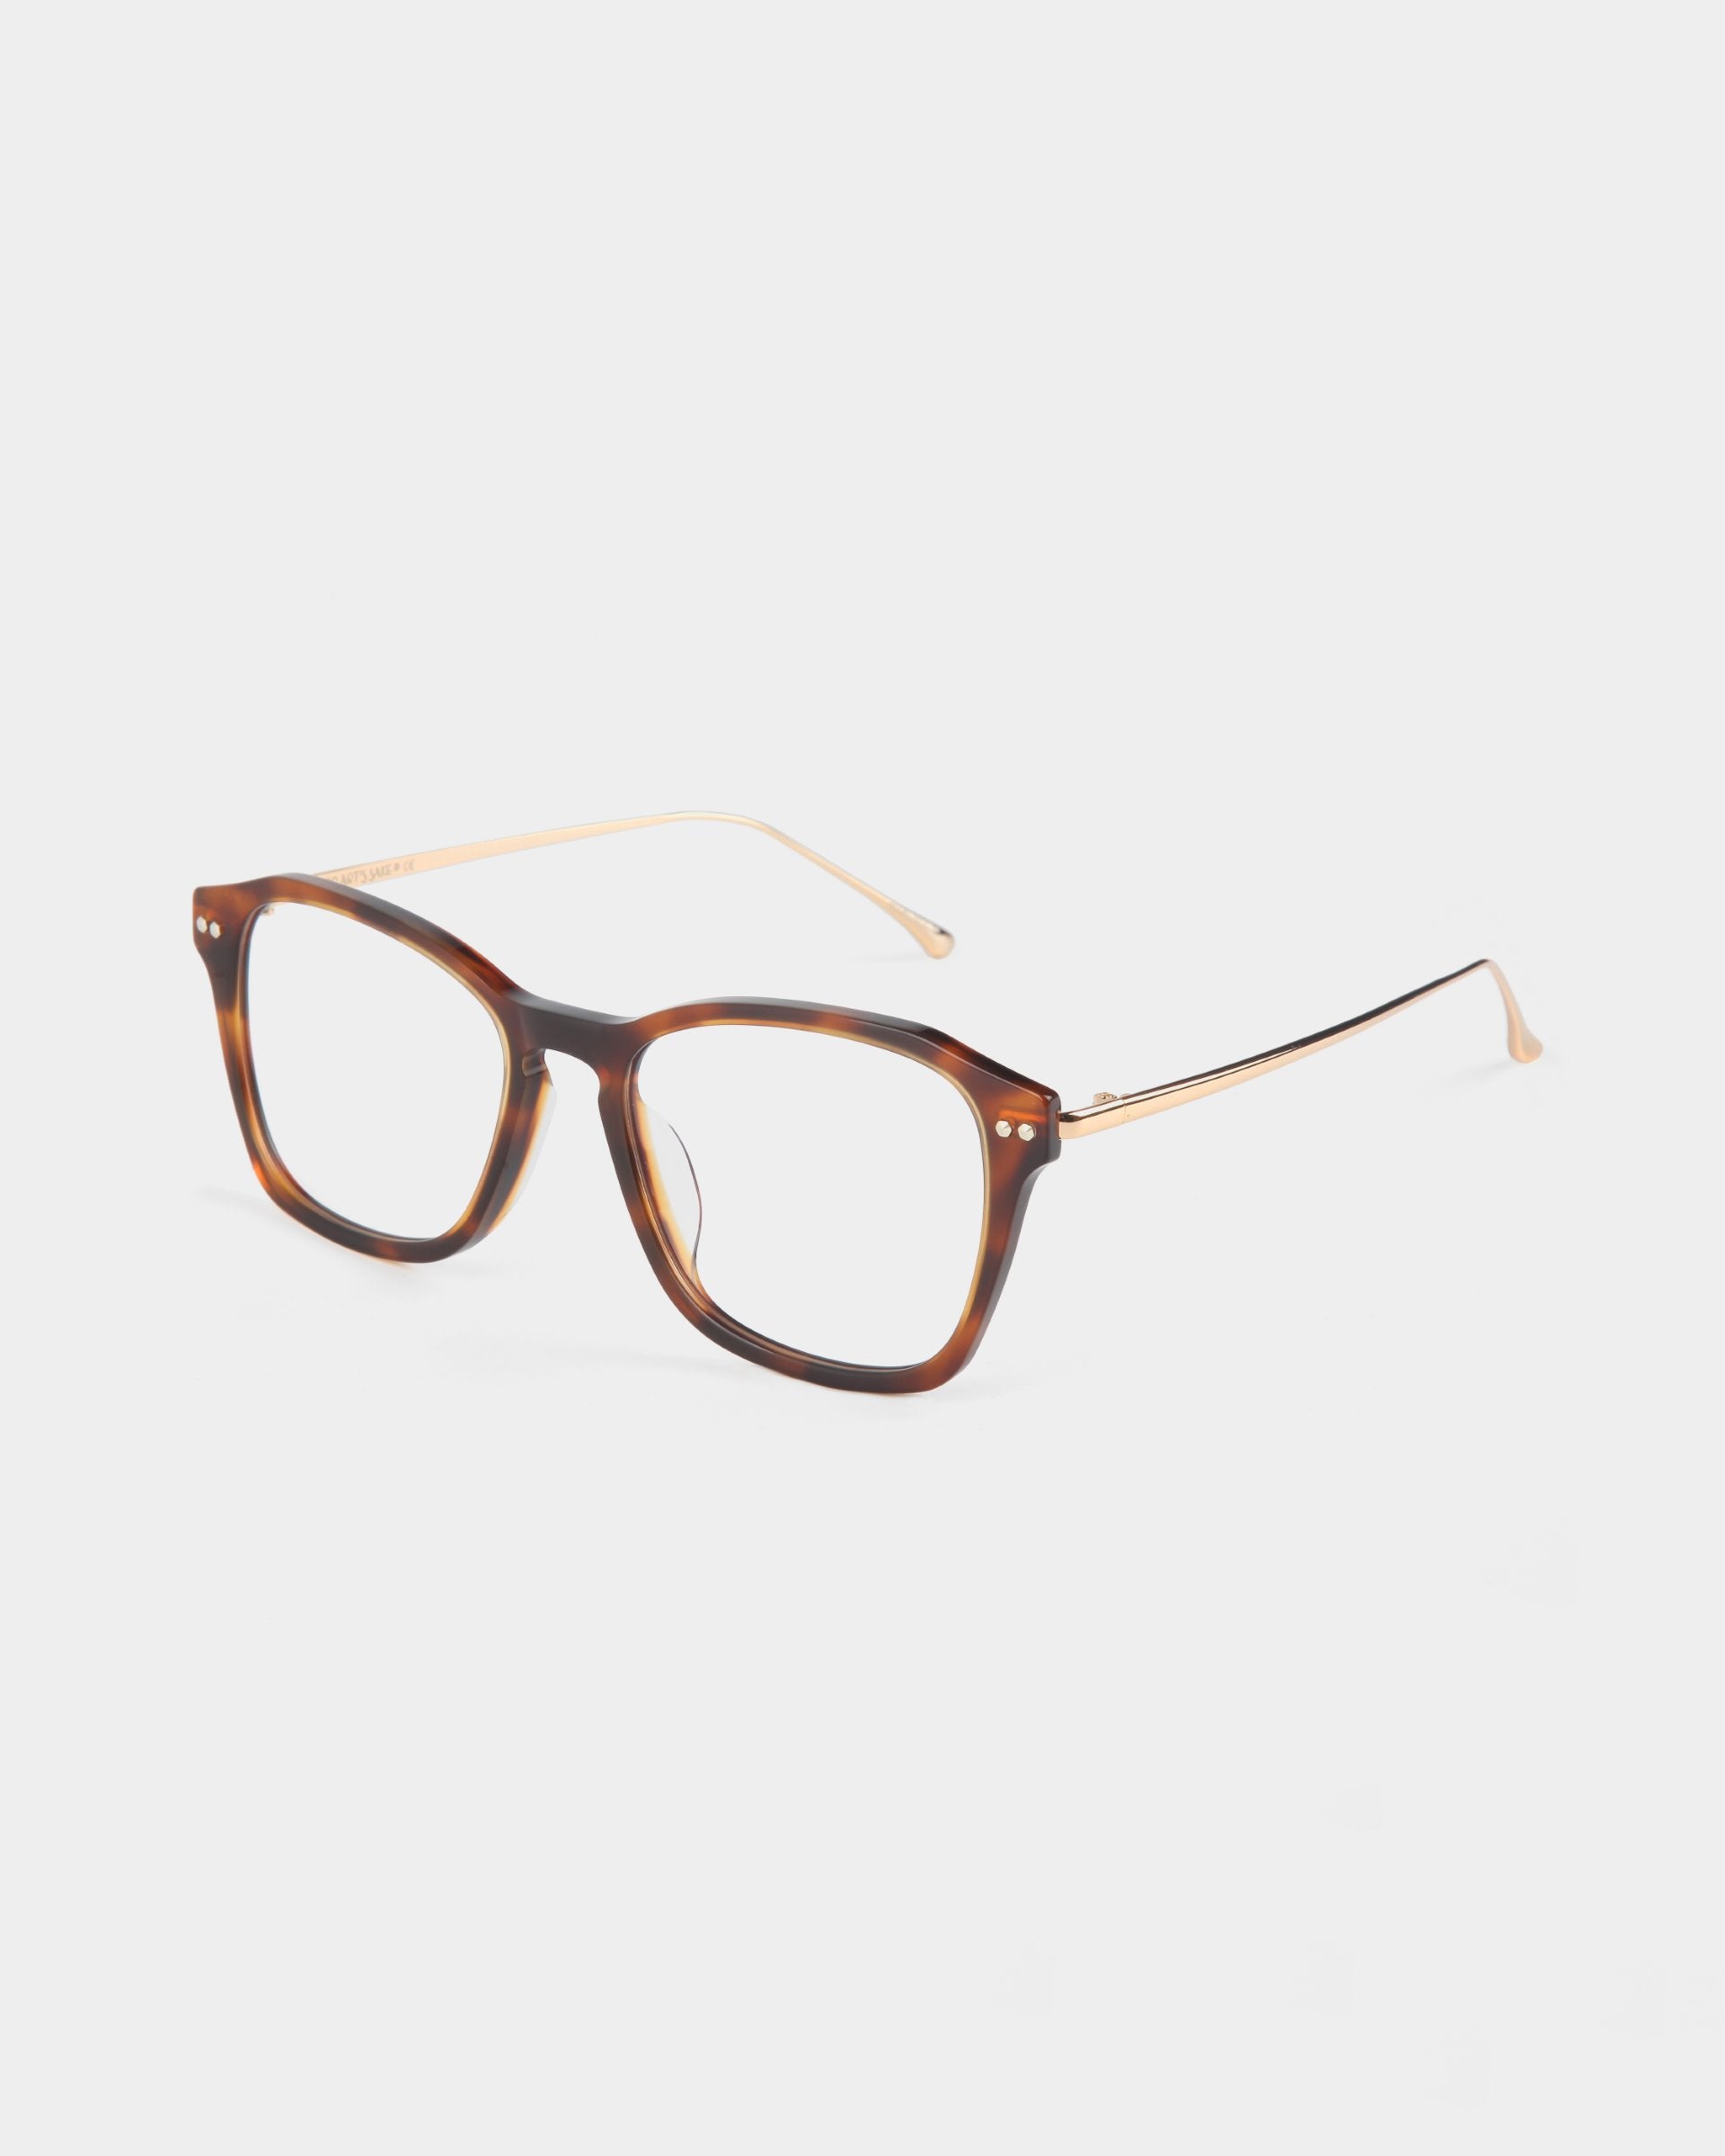 A pair of eyeglasses featuring square, tortoiseshell frames and thin gold temples. The style is modern with a blend of classic and contemporary design elements. They come with adjustable nose pads for comfort and an optional blue light filter. The background is plain and light-colored. This stylish accessory is the Morris by For Art&#39;s Sake®.